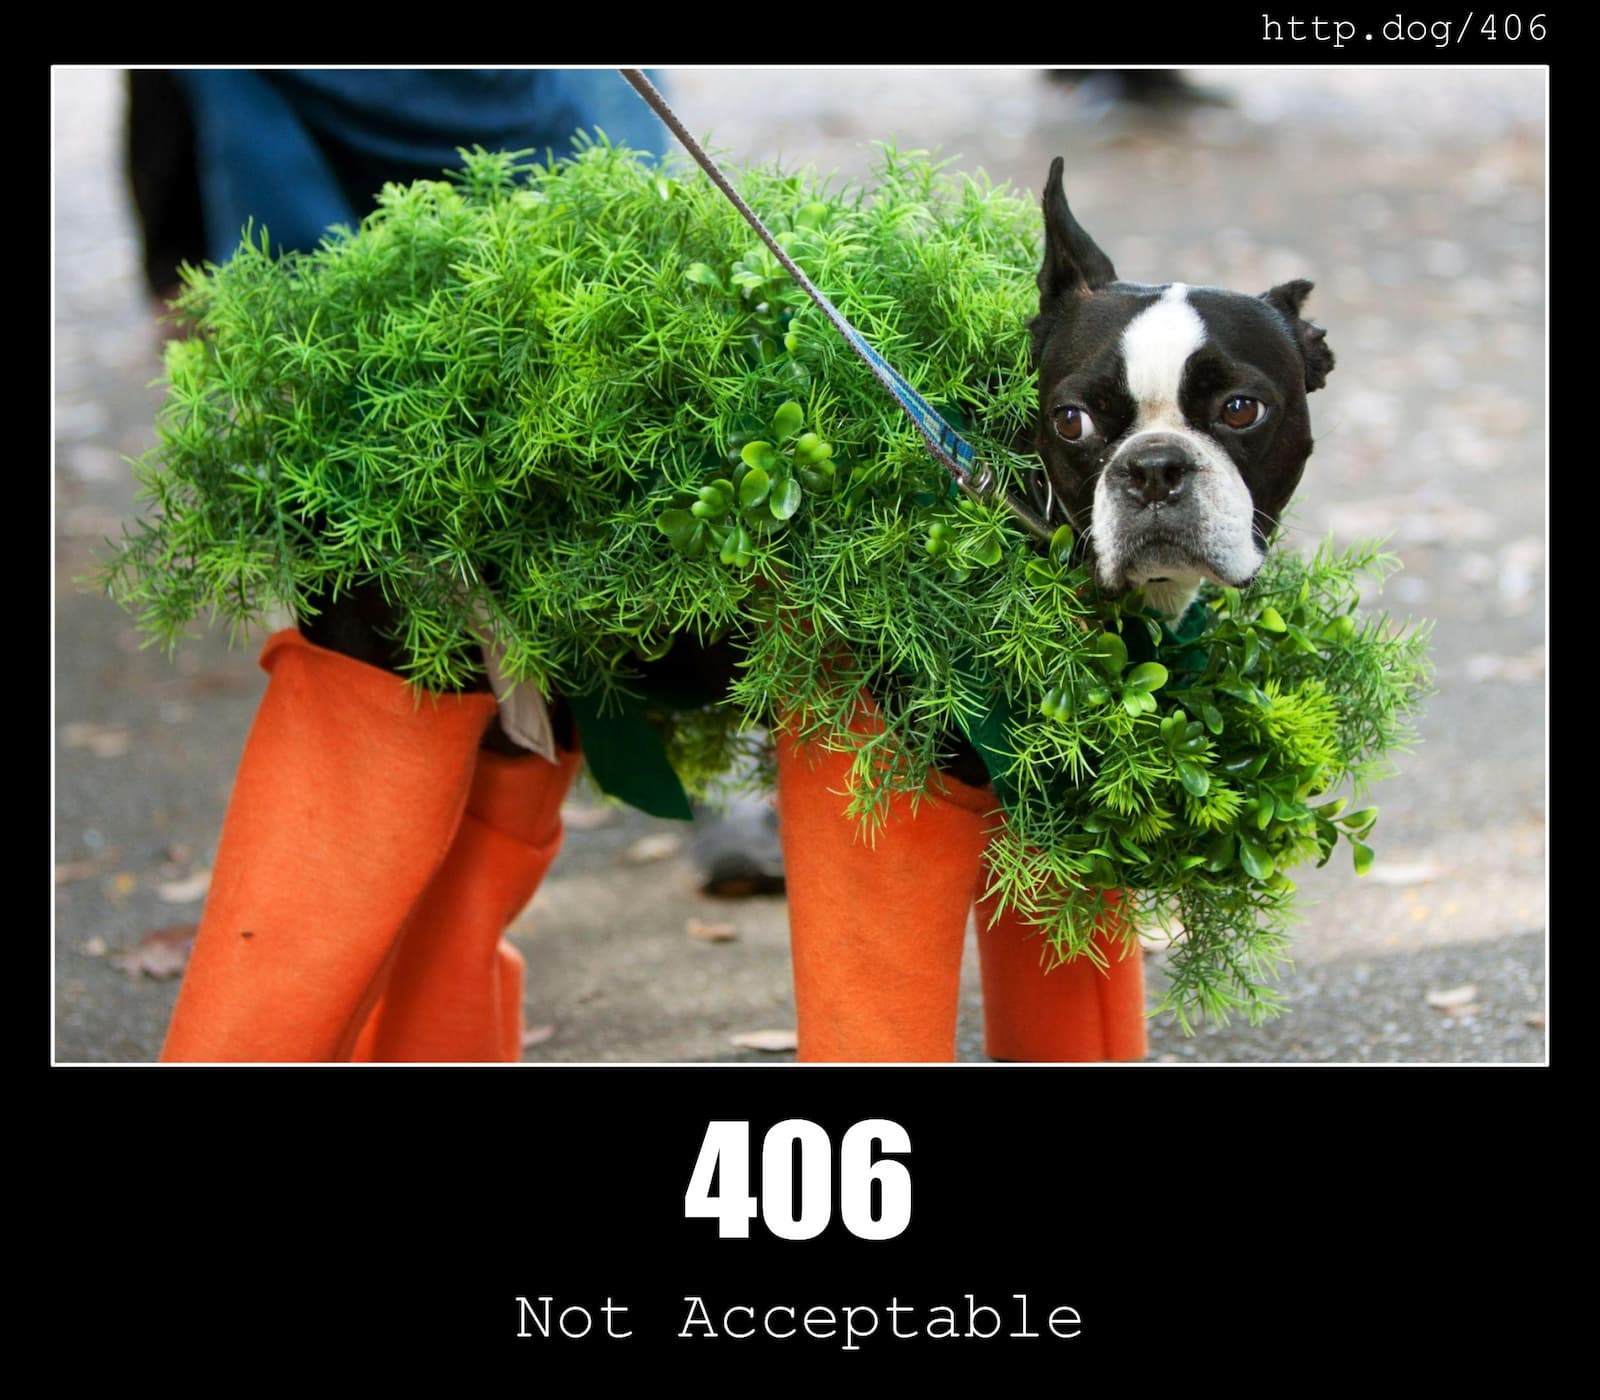 HTTP Status Code 406 Not Acceptable